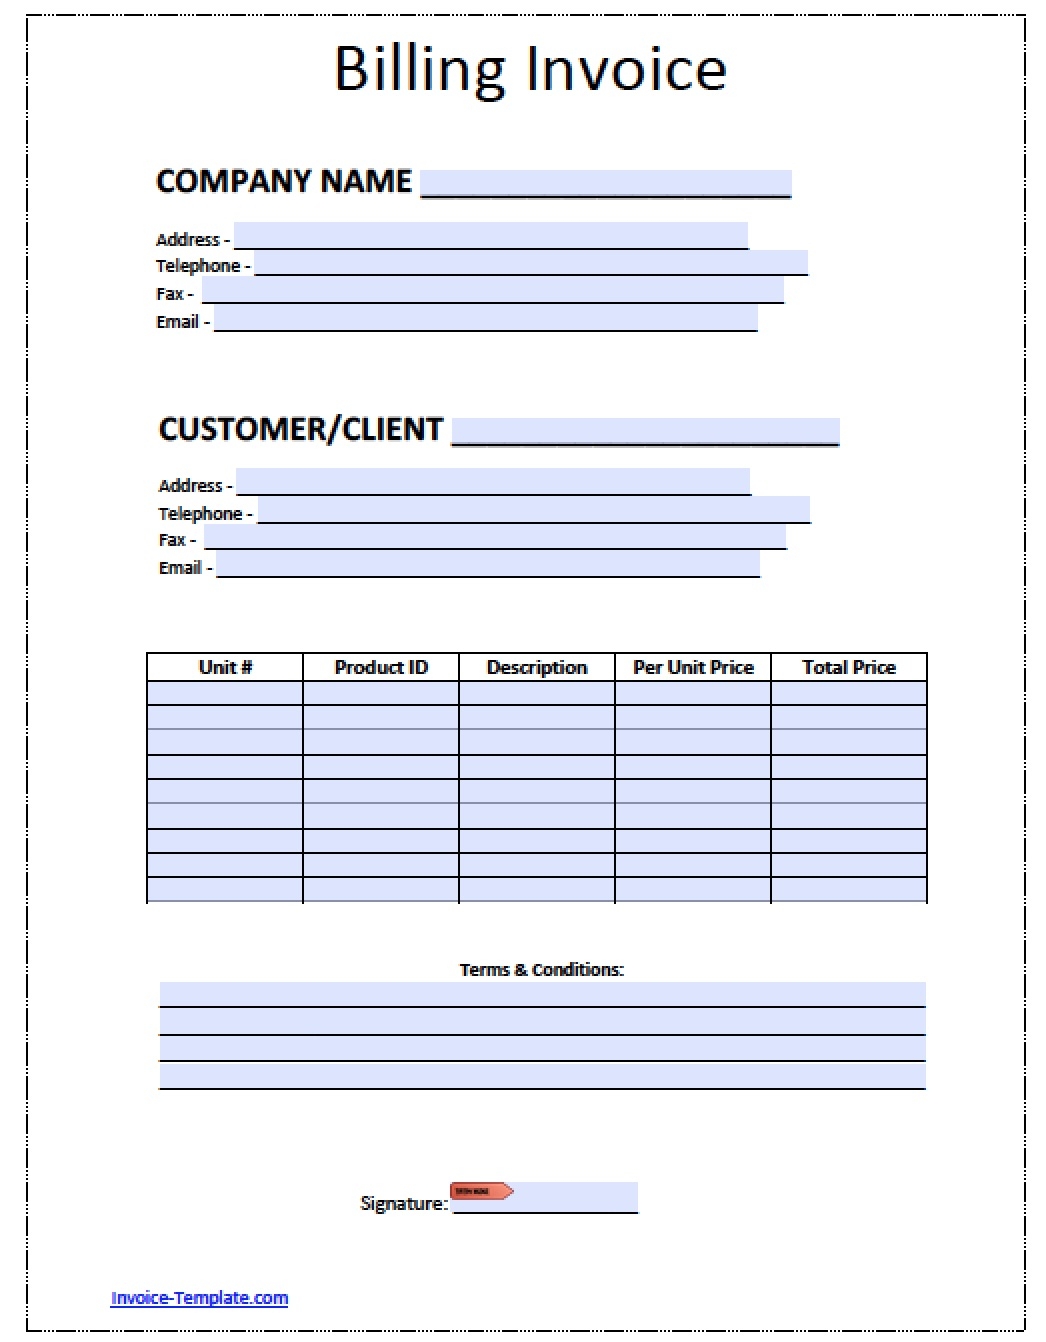 company invoice template invoice templat invoices free carbon carbon copy invoice forms